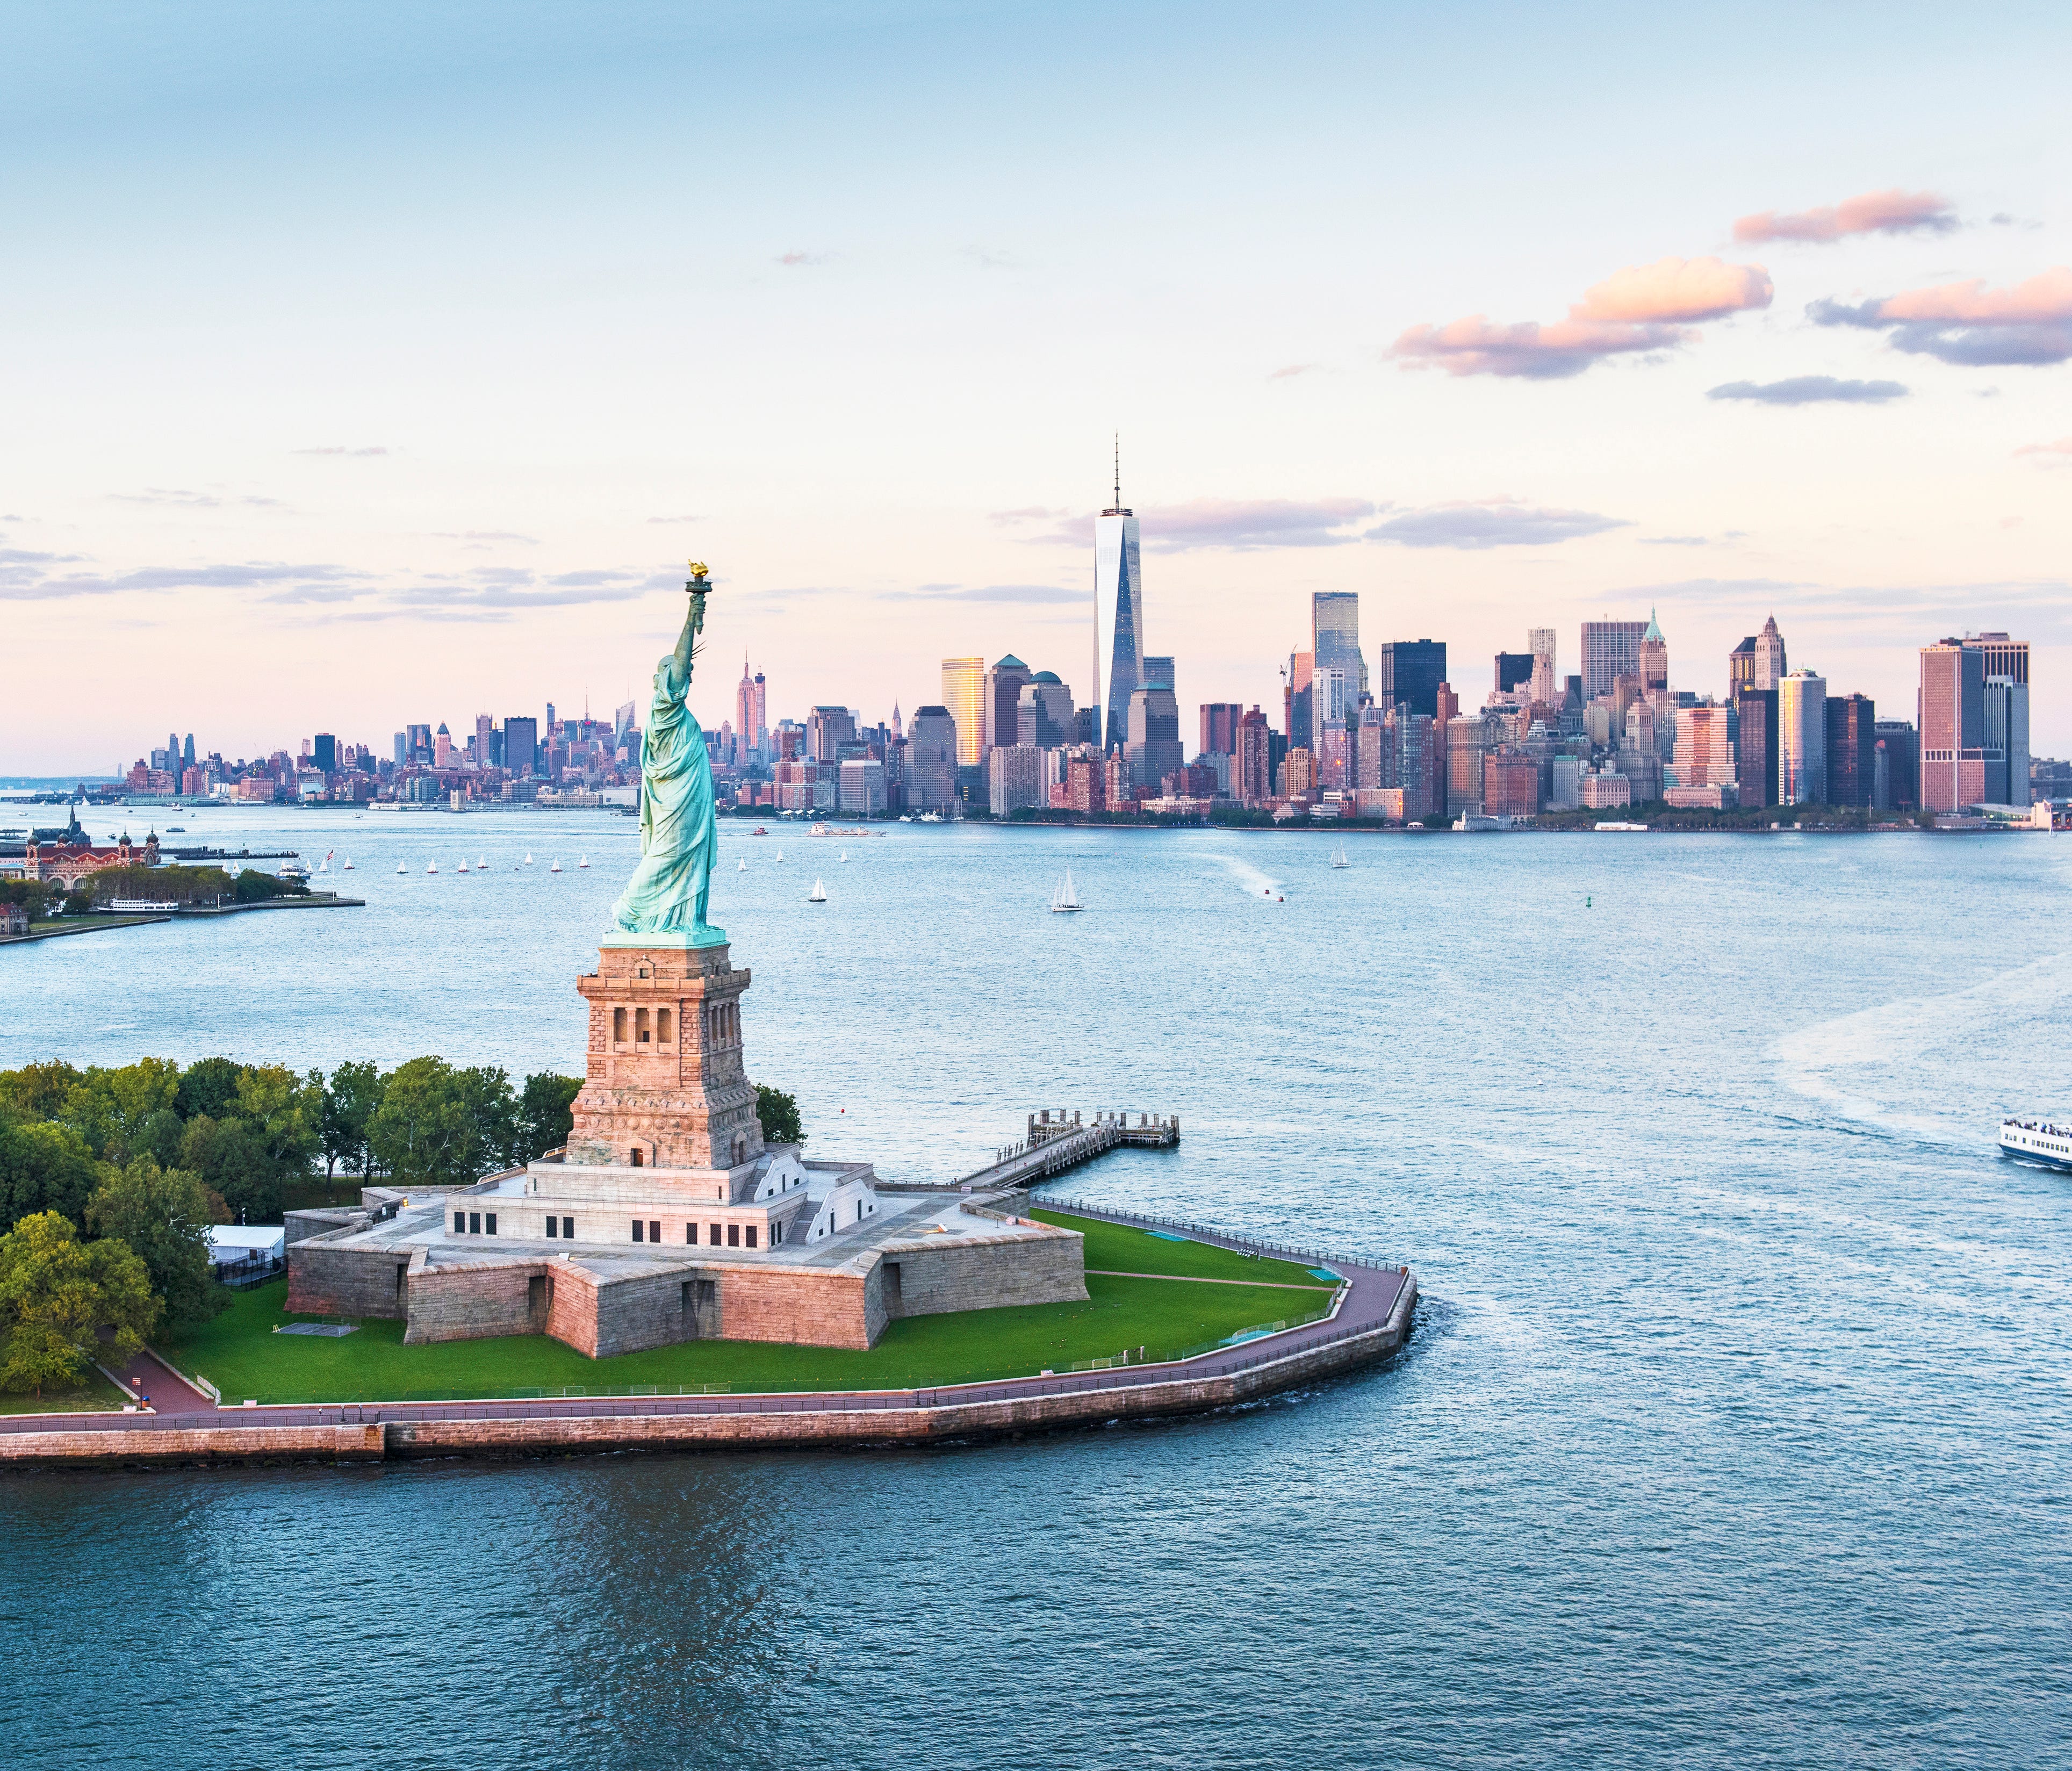 1. New York. The beloved Big Apple offers something for every type of traveler at any time of day, from Broadway shows to some of the world's most iconic attractions. Average annual hotel rate in New York City: $406 per night on TripAdvisor. Least ex